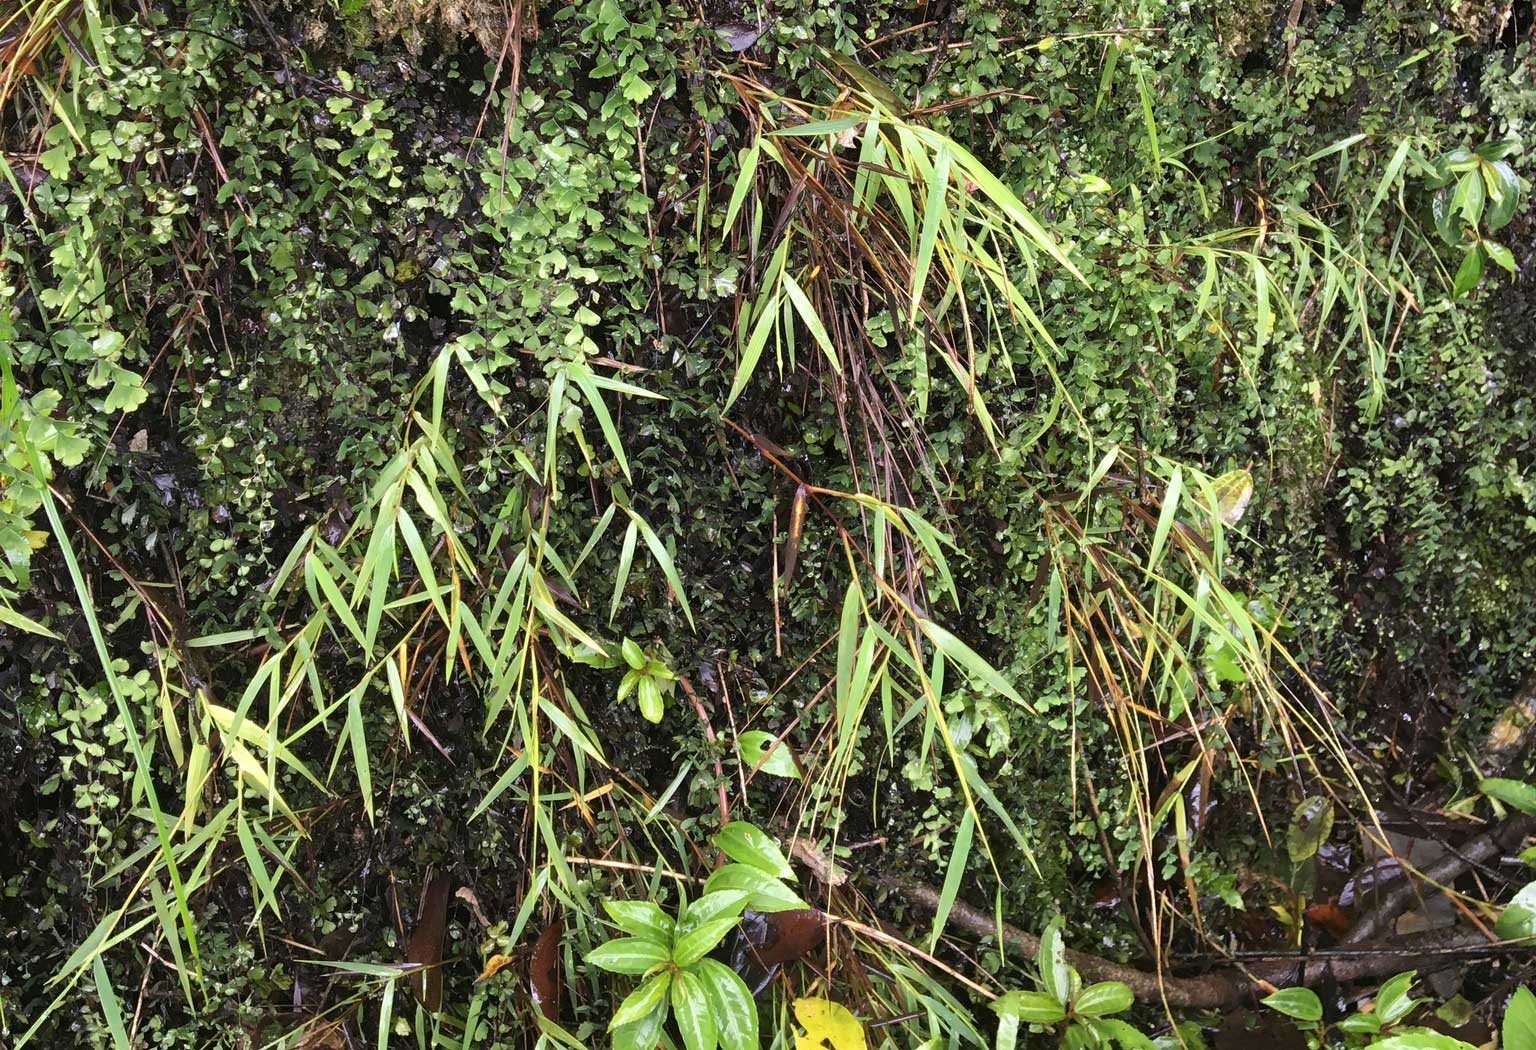 Photograph showing baby bamboo grass growing in its native habitat in Taiwan. The grass is growing scattered among ferns on a very wet wall. The wall could be rock, but the plants are entirely obscuring it.